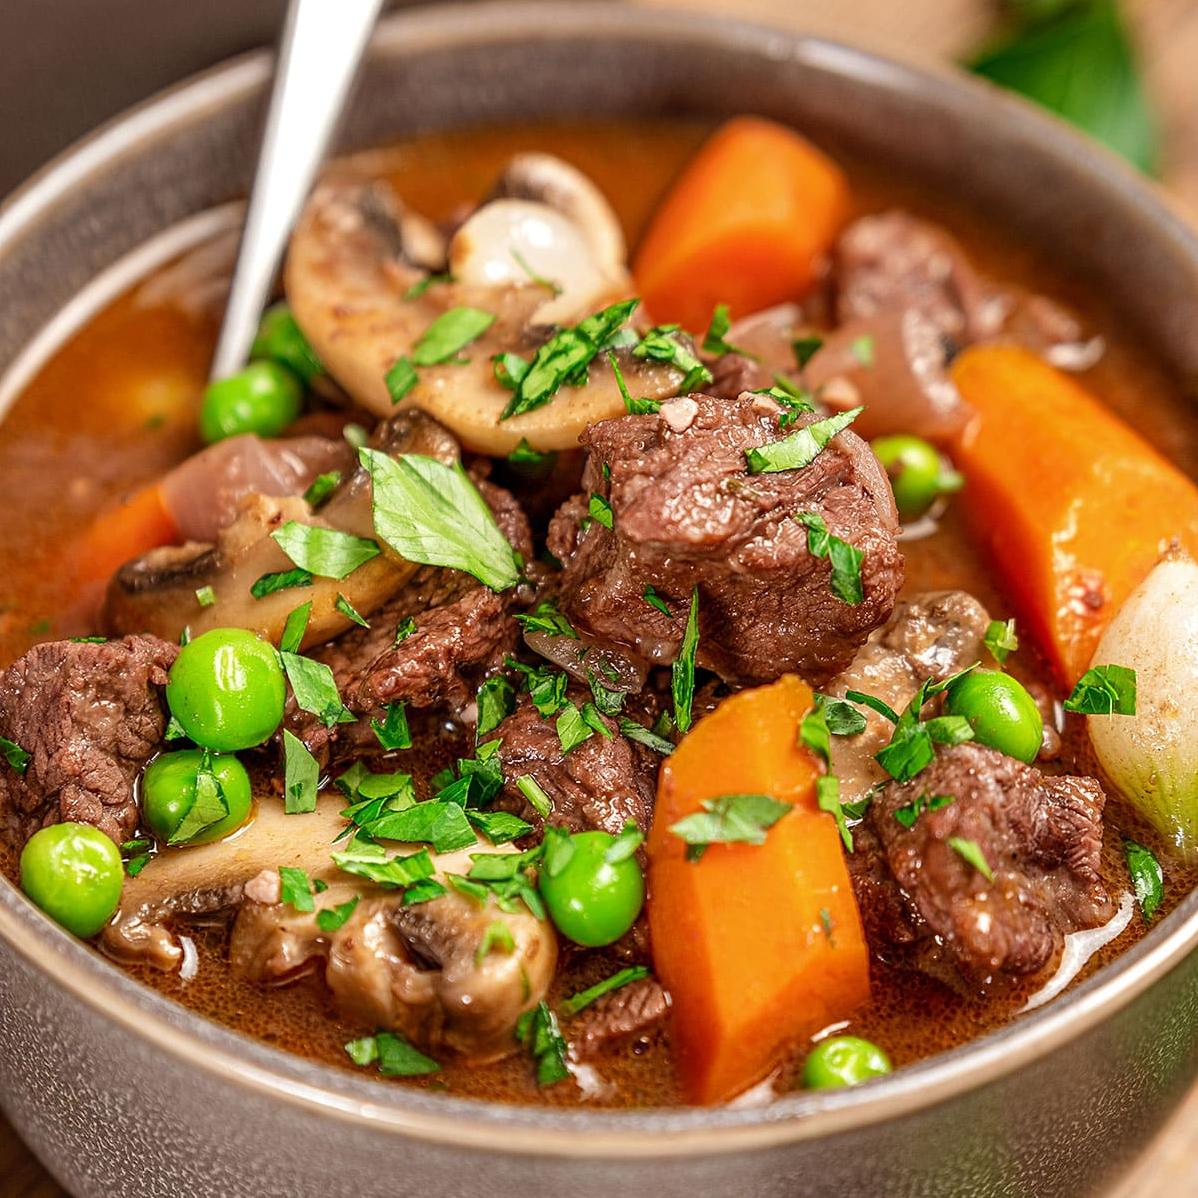  Melt-in-your-mouth tender beef, slow-cooked in a wine-based broth with savory vegetables.